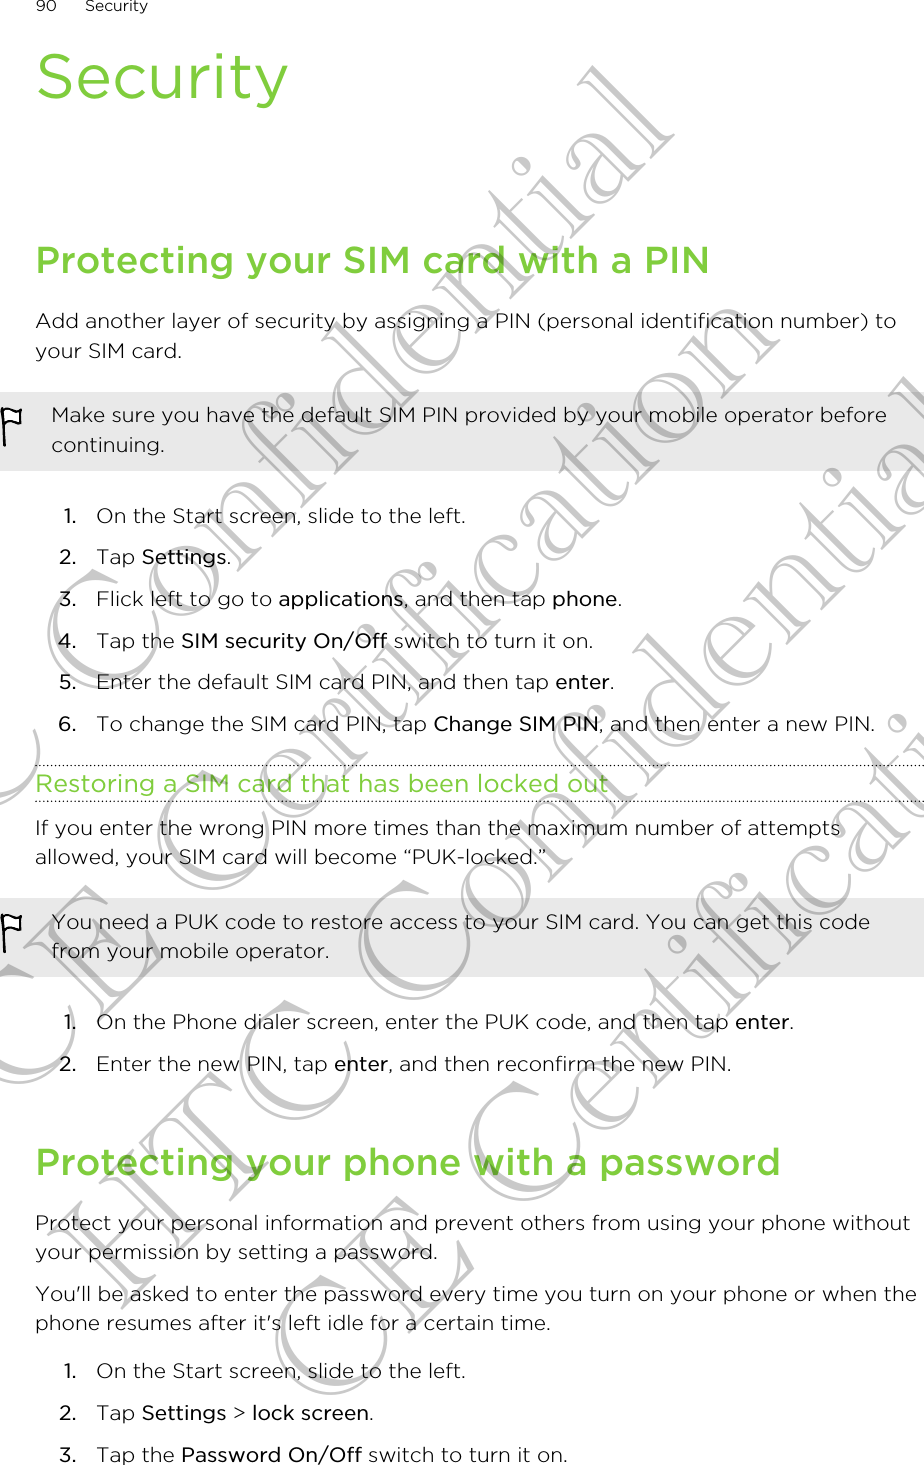 SecurityProtecting your SIM card with a PINAdd another layer of security by assigning a PIN (personal identification number) toyour SIM card.Make sure you have the default SIM PIN provided by your mobile operator beforecontinuing.1. On the Start screen, slide to the left.2. Tap Settings.3. Flick left to go to applications, and then tap phone.4. Tap the SIM security On/Off switch to turn it on.5. Enter the default SIM card PIN, and then tap enter.6. To change the SIM card PIN, tap Change SIM PIN, and then enter a new PIN.Restoring a SIM card that has been locked outIf you enter the wrong PIN more times than the maximum number of attemptsallowed, your SIM card will become “PUK-locked.”You need a PUK code to restore access to your SIM card. You can get this codefrom your mobile operator.1. On the Phone dialer screen, enter the PUK code, and then tap enter.2. Enter the new PIN, tap enter, and then reconfirm the new PIN.Protecting your phone with a passwordProtect your personal information and prevent others from using your phone withoutyour permission by setting a password.You&apos;ll be asked to enter the password every time you turn on your phone or when thephone resumes after it&apos;s left idle for a certain time.1. On the Start screen, slide to the left.2. Tap Settings &gt; lock screen.3. Tap the Password On/Off switch to turn it on.90 SecurityHTC Confidential CE Certification HTC Confidential CE Certification